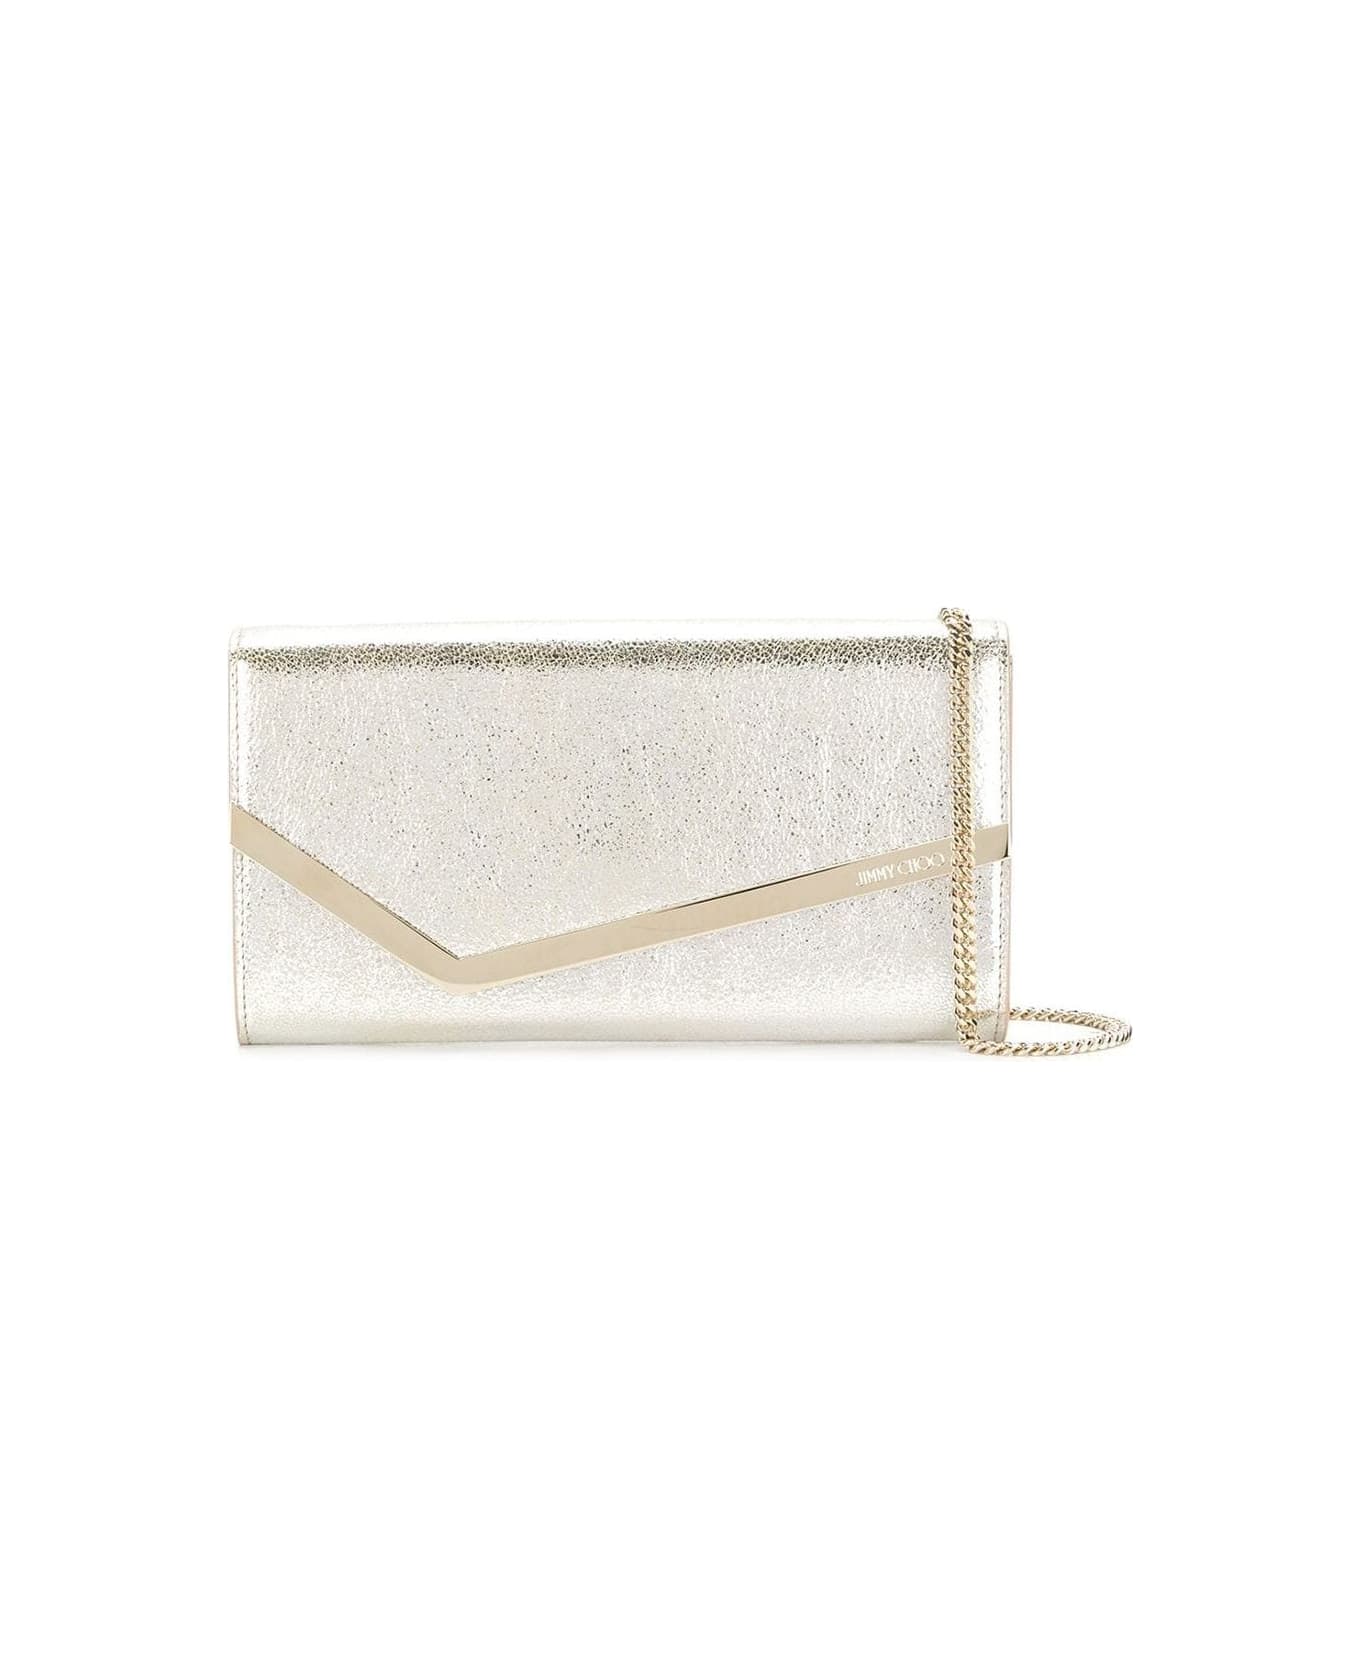 Jimmy Choo Emmie Clutch Bag In Champagne Leather With Glitter - White